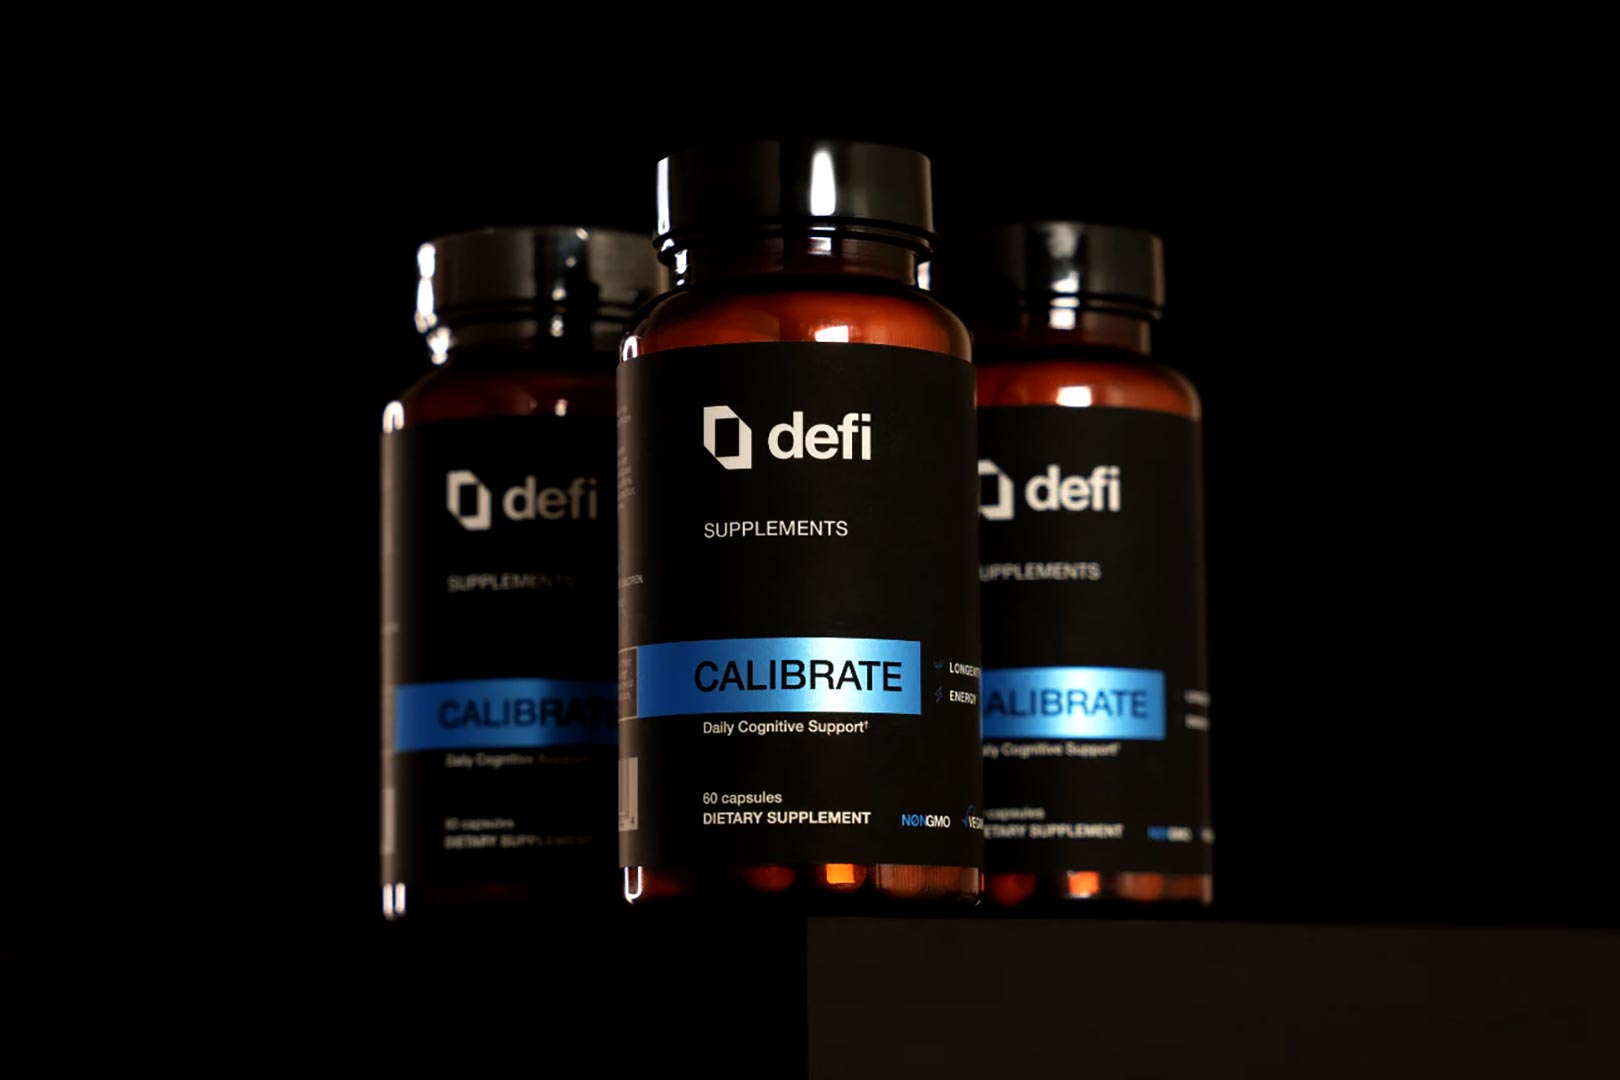 Introducing Defi Supplements And Calibrate